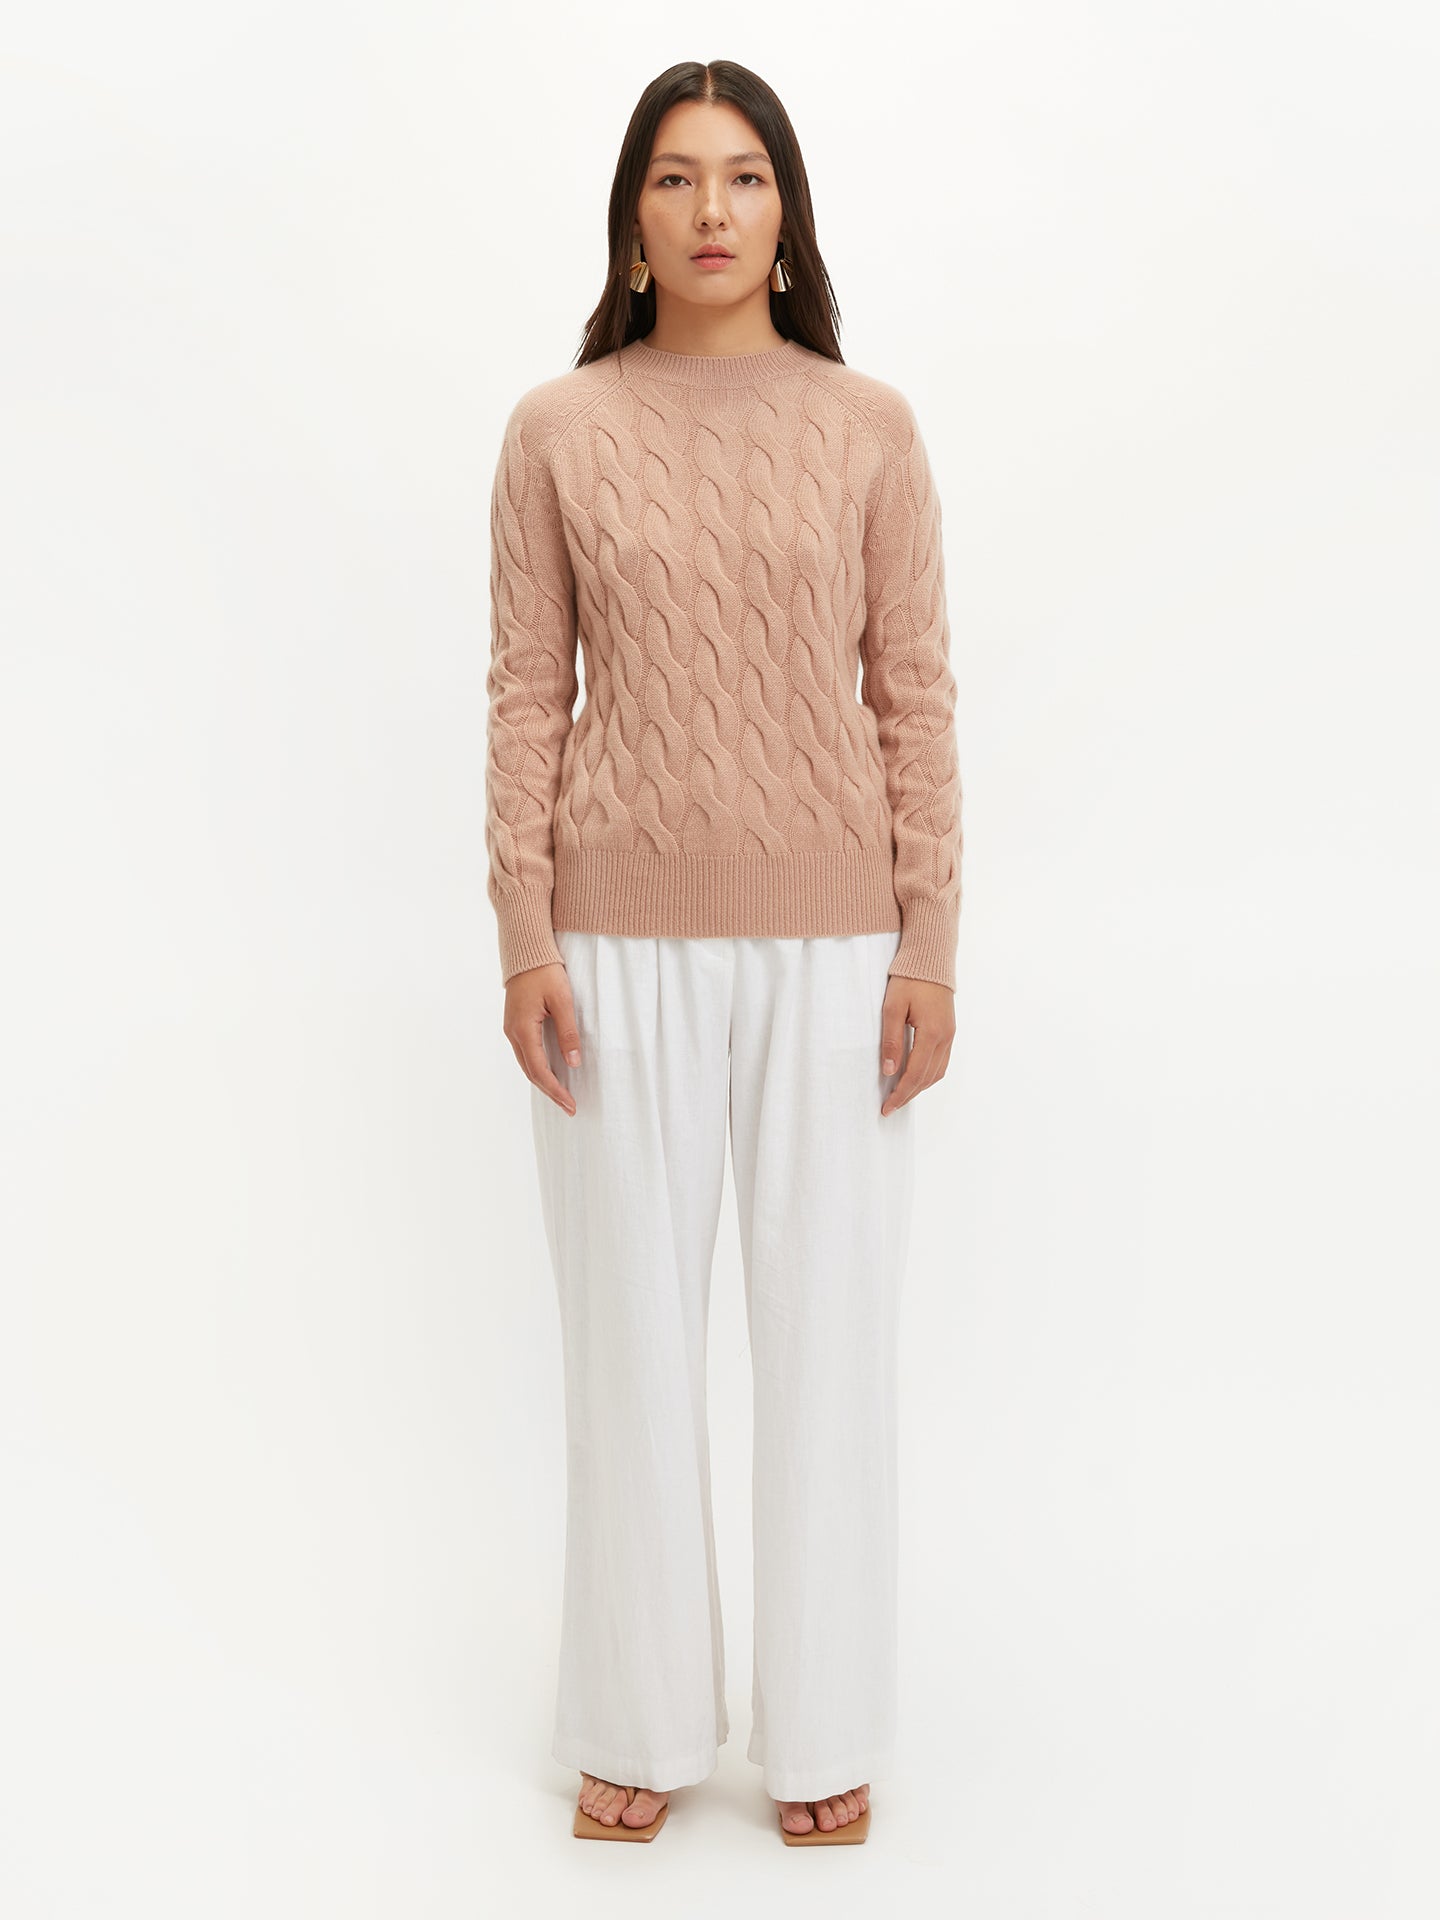 Women's Cashmere Cable Knit Round Neck Toasted Almond - Gobi Cashmere